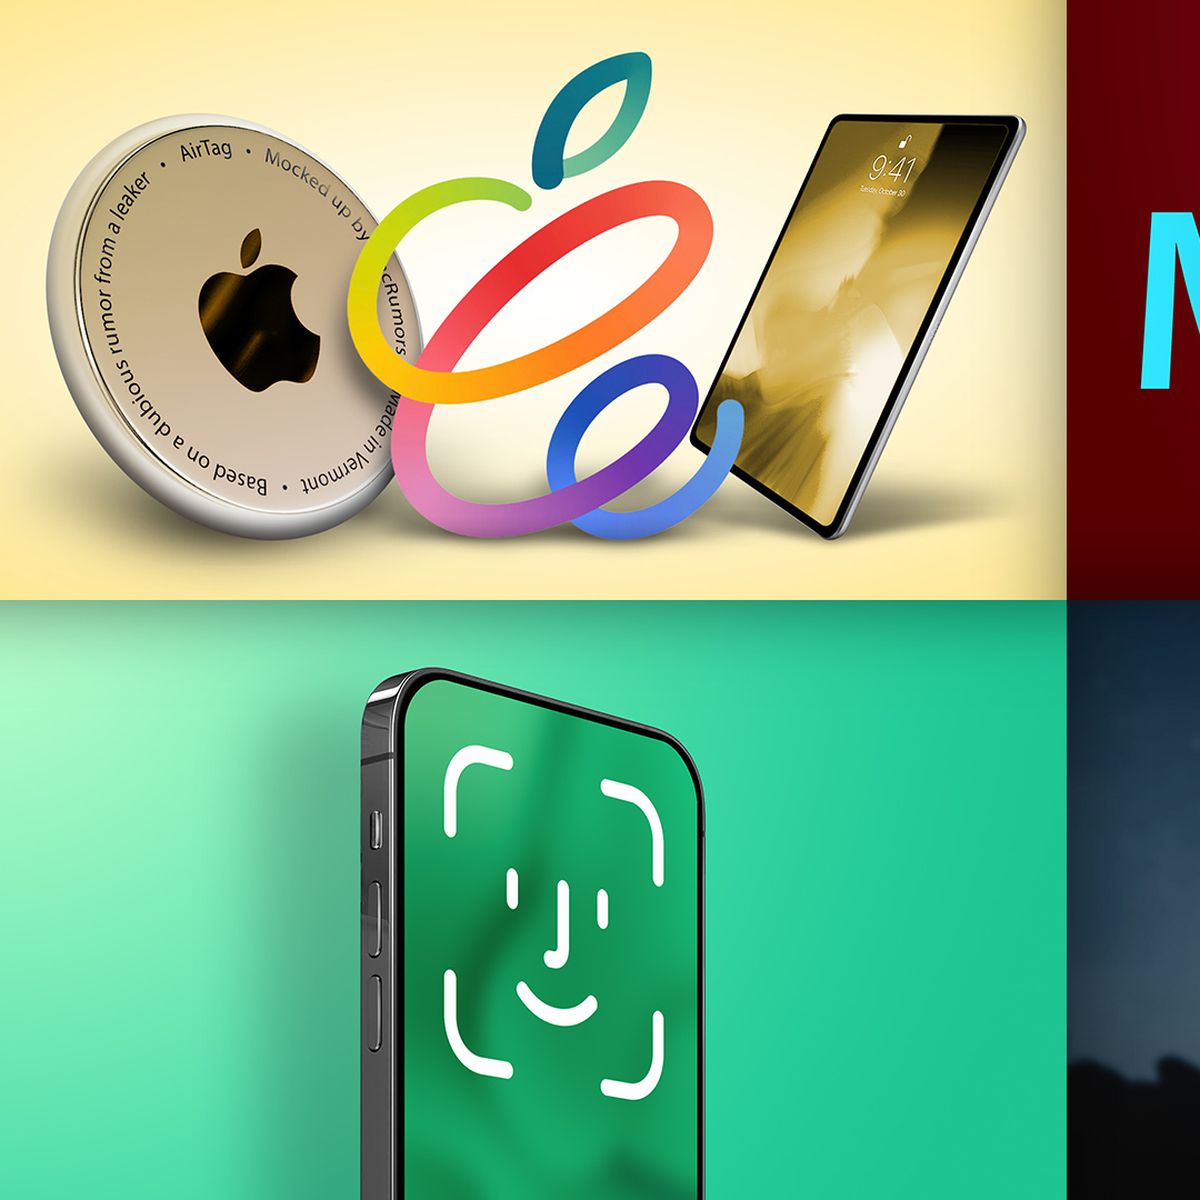 Apple Spring Event: Date, rumors, new Macs, iPads, and more